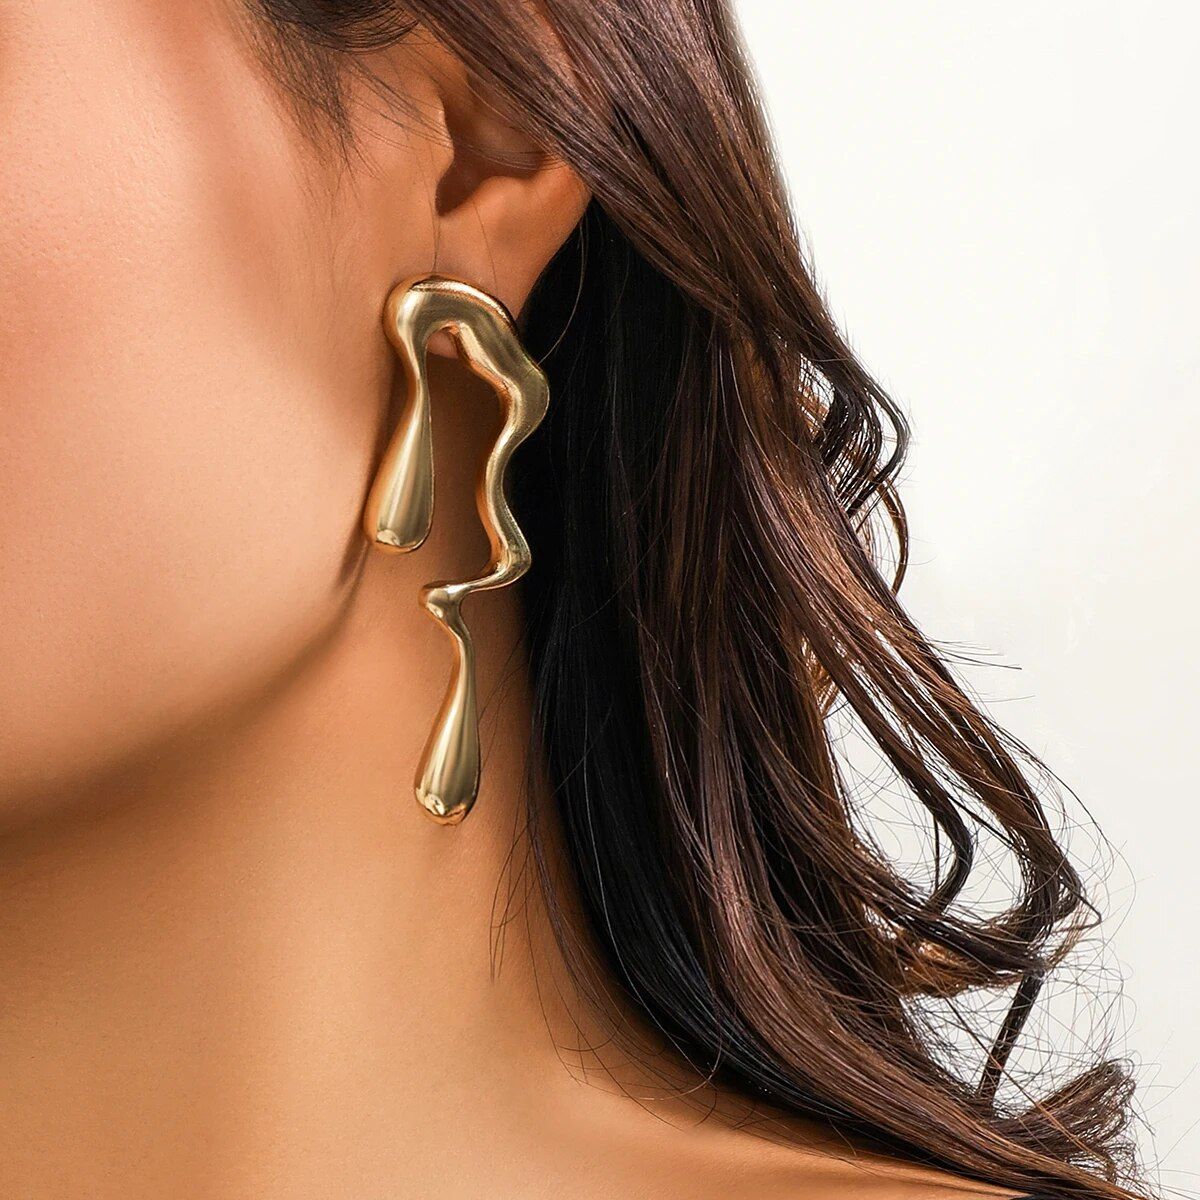 Close-up of a woman wearing a unique, Vintage Gold Geometric Water Drop earring, focusing on her ear and the lower part of her face with visible brunette hair. This fashion accessory highlights contemporary fashion trends.